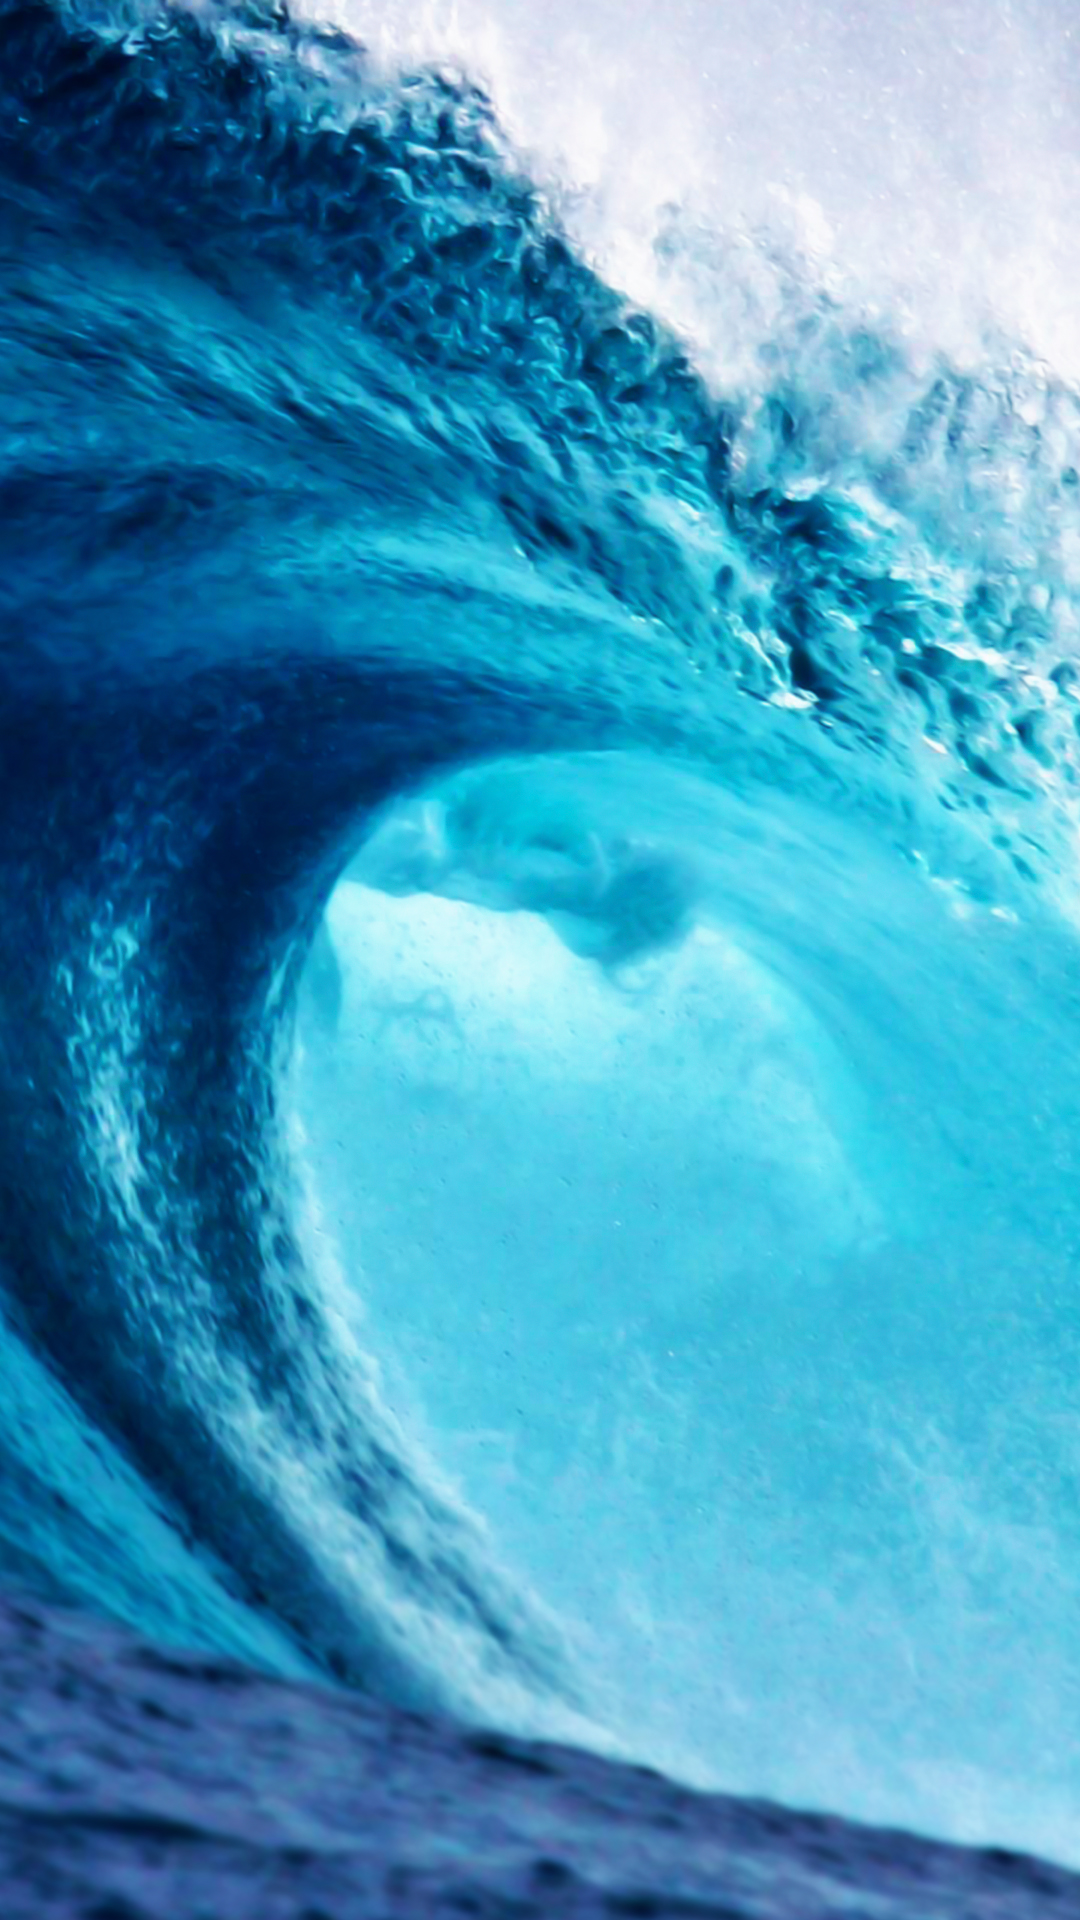 Wave Wallpapers Hd Iphone Xs Max - HD Wallpaper 